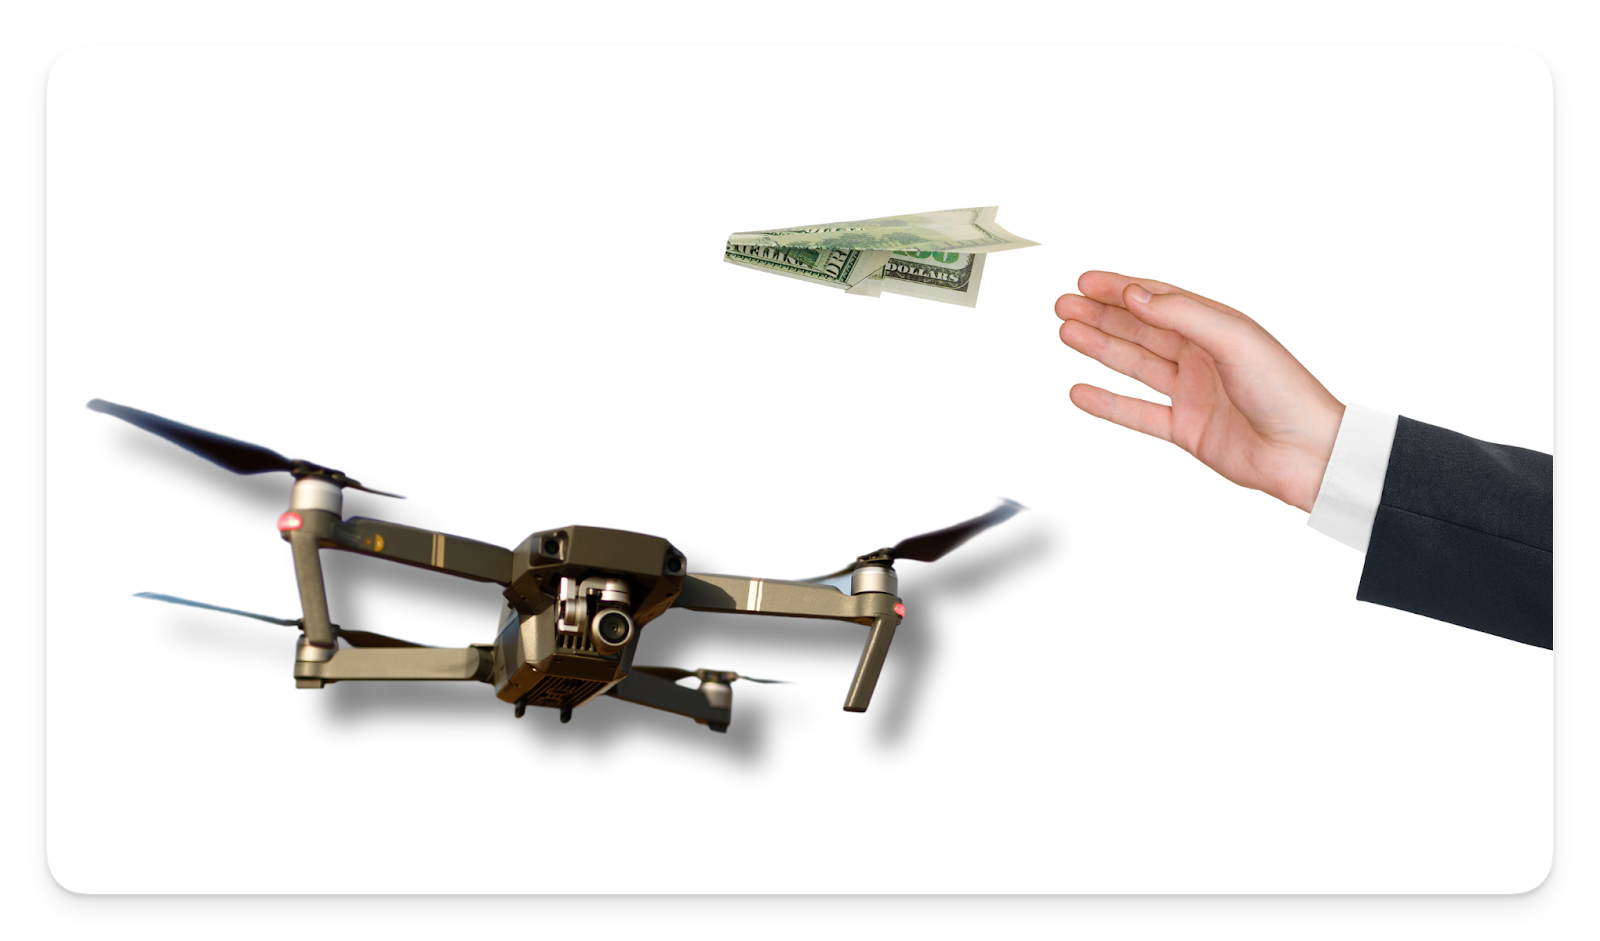 A drone with money flying in the background.